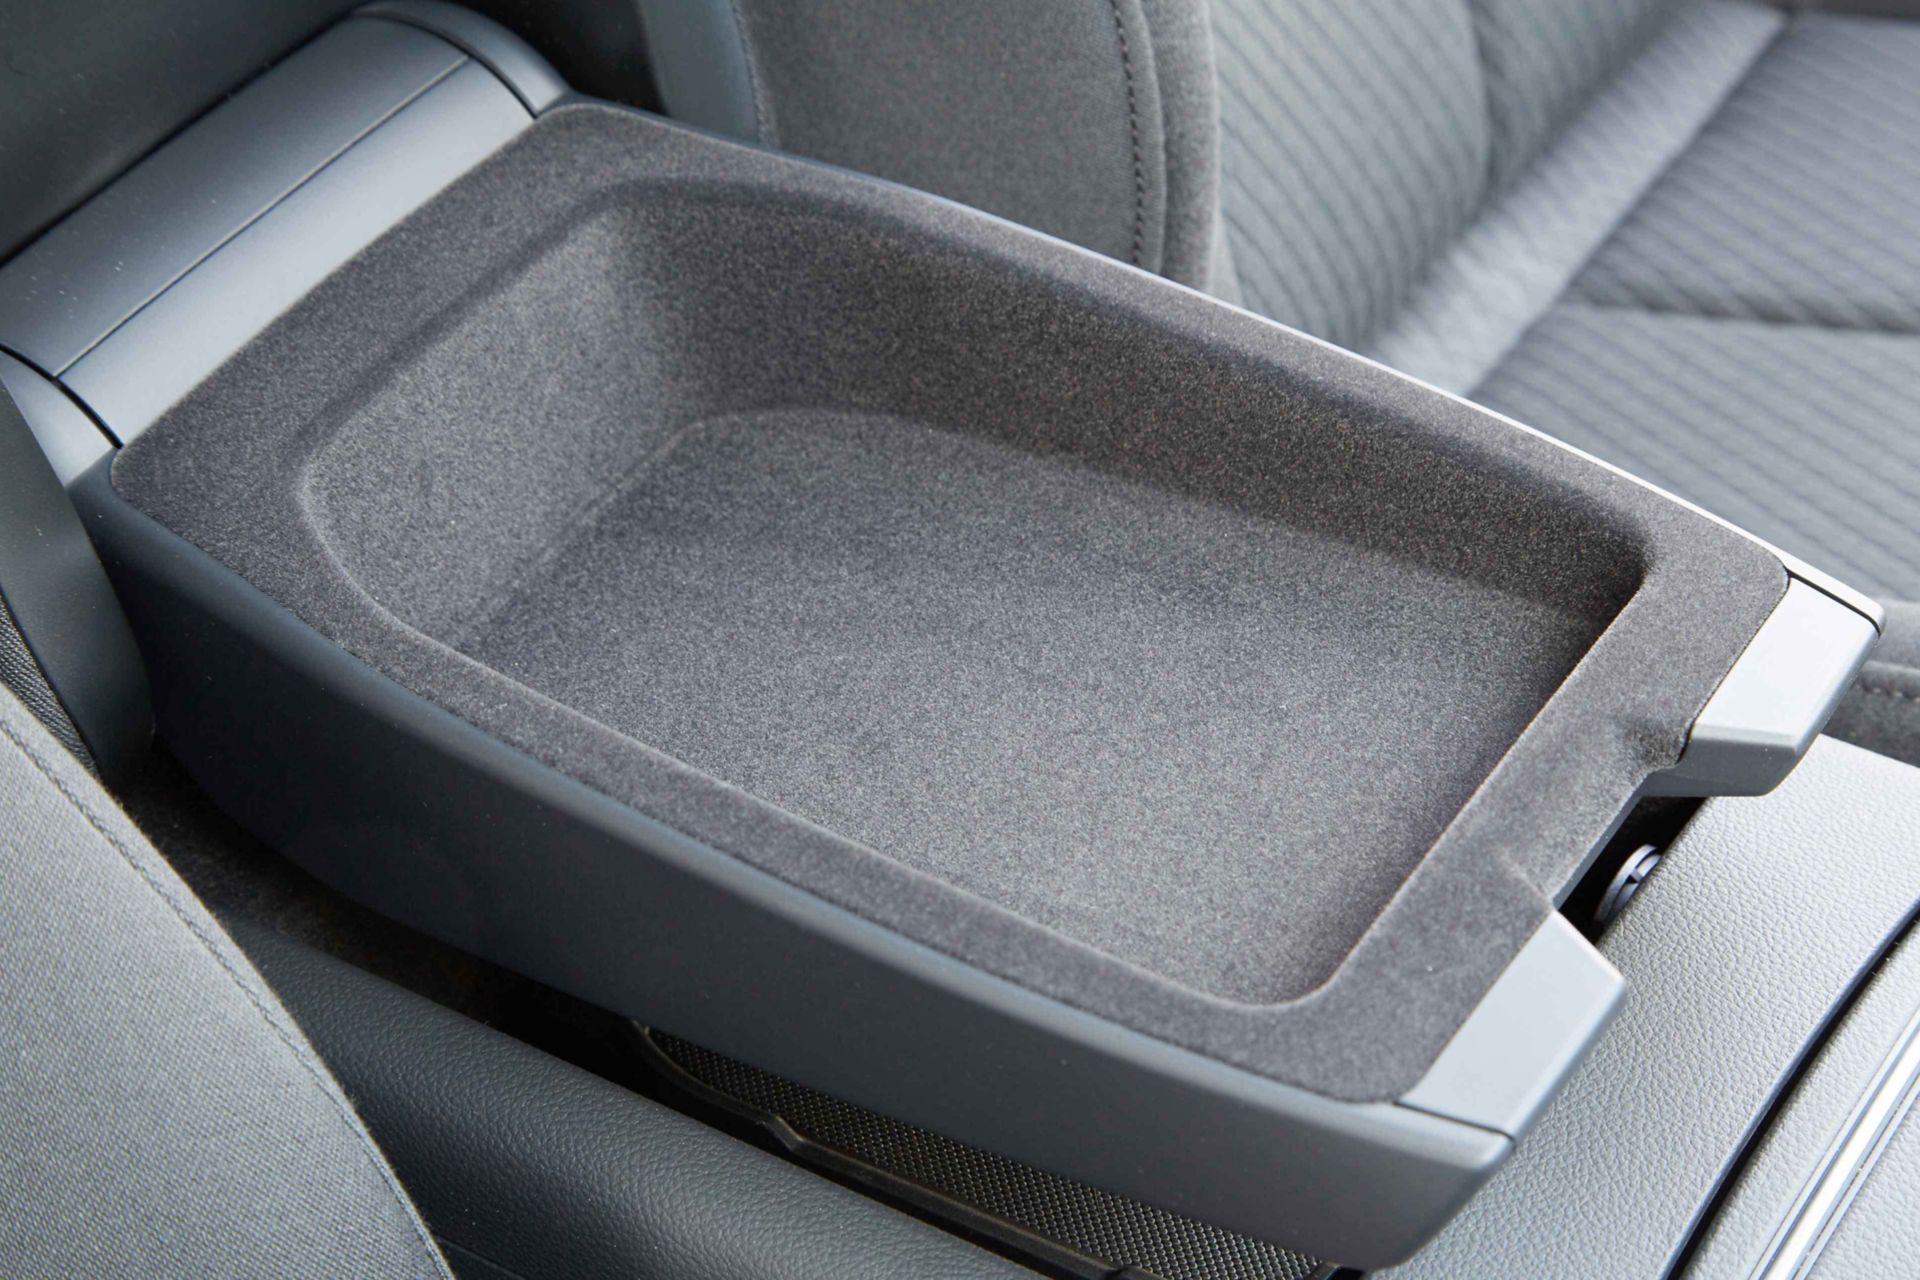 View of vehicle center console storage using Sika interior flocking adhesive solutions